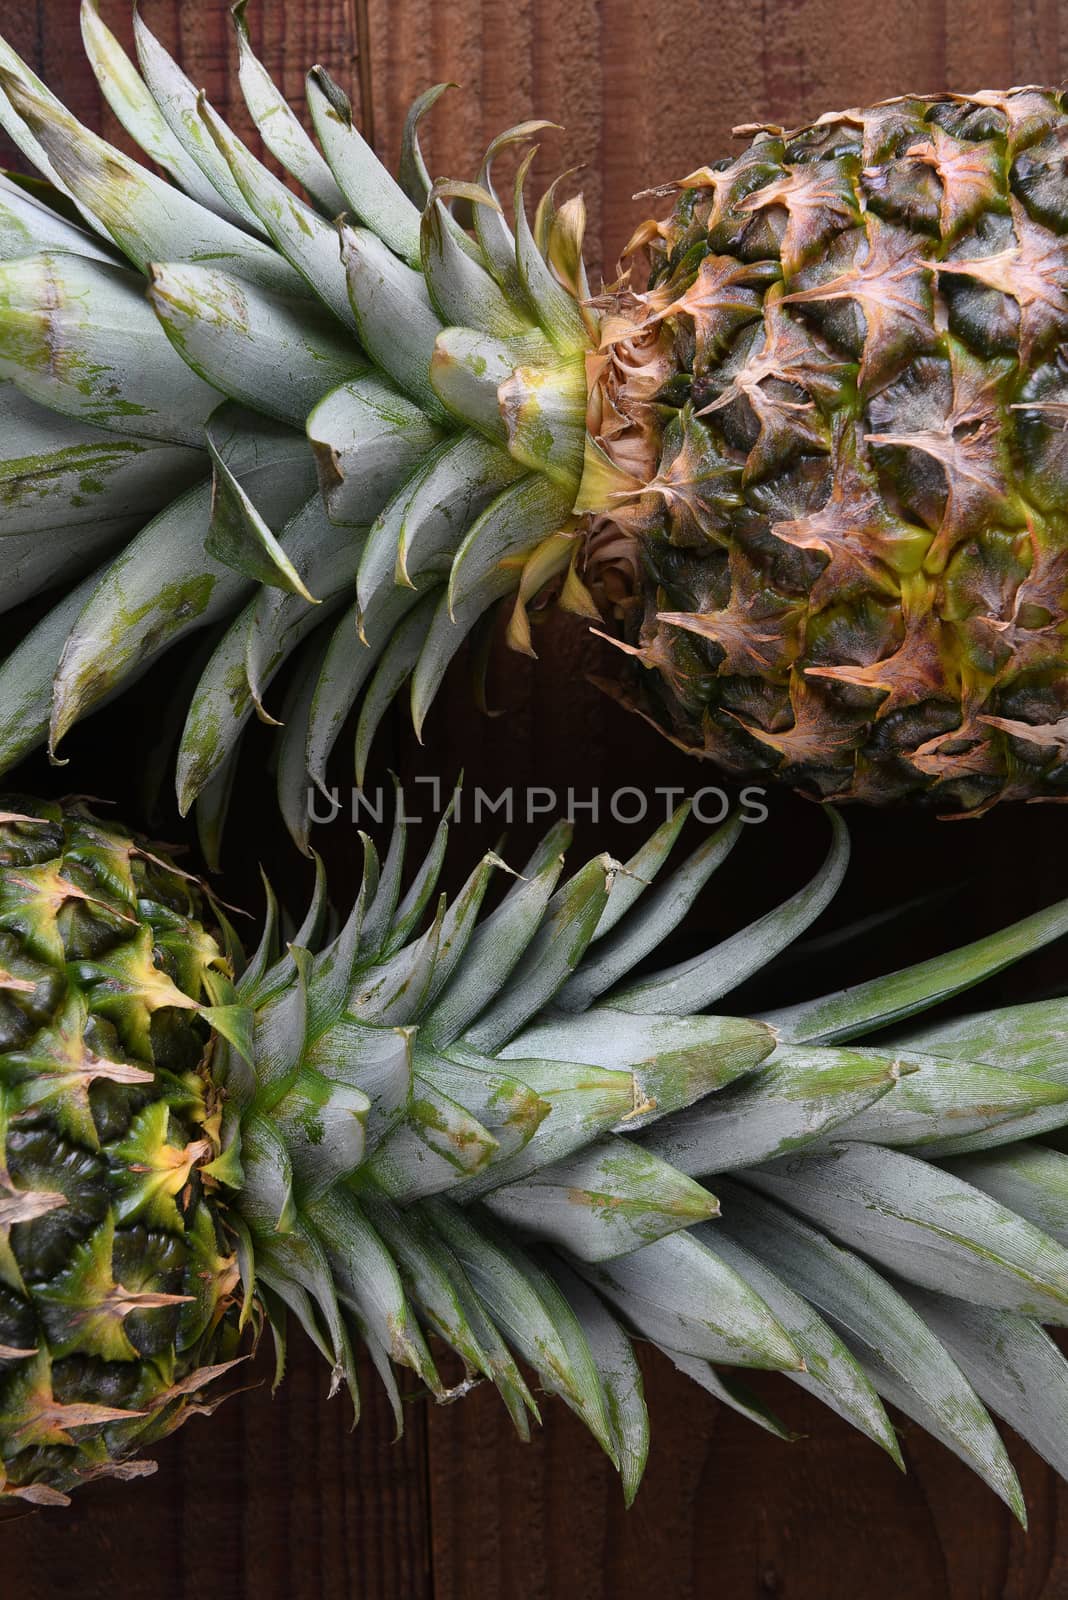 Pineapples: Closeup of two fresh ripe pineapples on a dark wood surface.